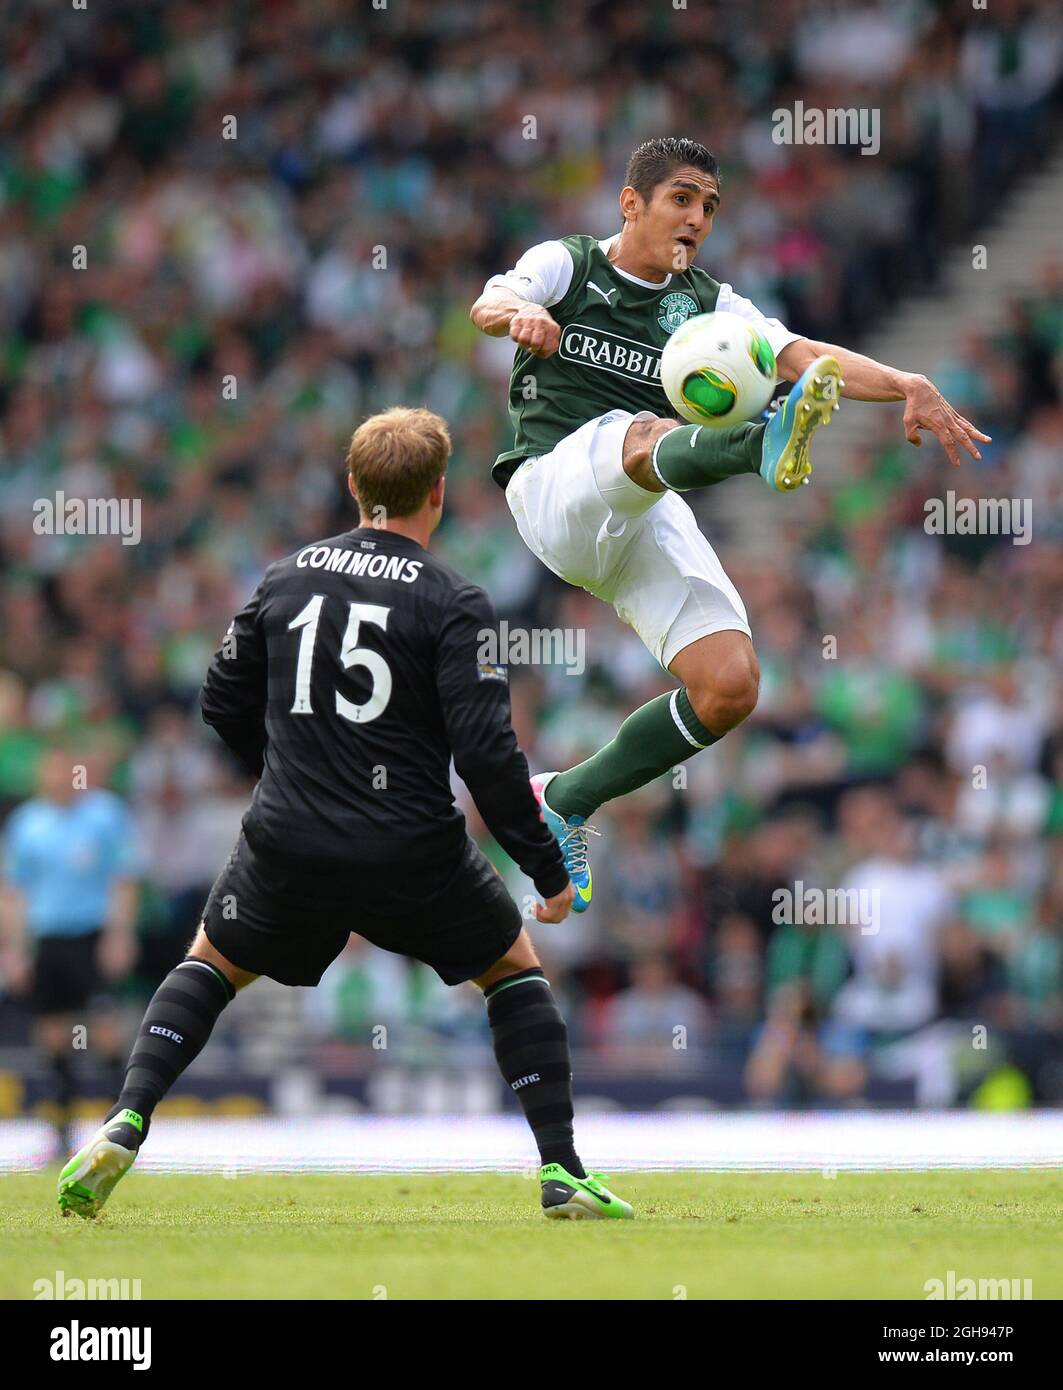 Jorge Claros of Hibernian jumps up and flicks the ball past Kris Commons of Celtic during the William Hill Scottish Cup Final between Hibernian and Celtic at the Hampden Park Stadium in Glasgow, Scotland on May 26, 2013. Picture Simon Bellis Stock Photo